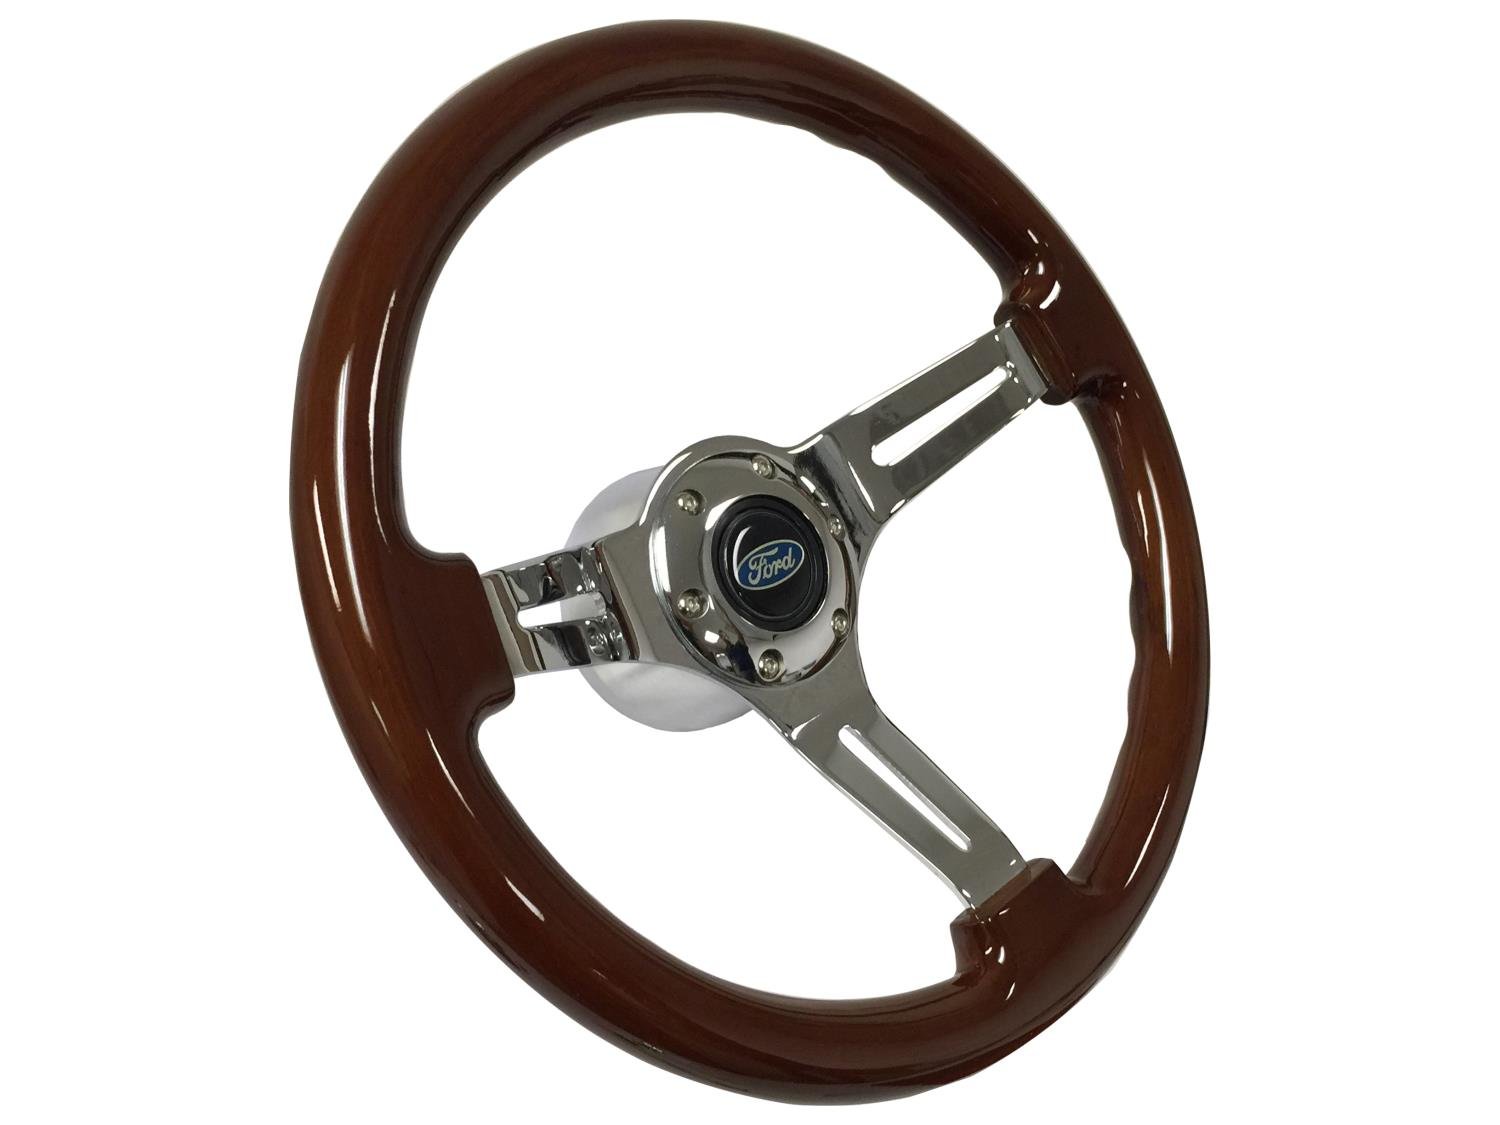 S6 Sport Steering Wheel Kit for 1968-1973 Ford/Mercury, 14 in. Diameter, Mahogany Wood Grip, with 6-Bolt Adapter and Horn Button